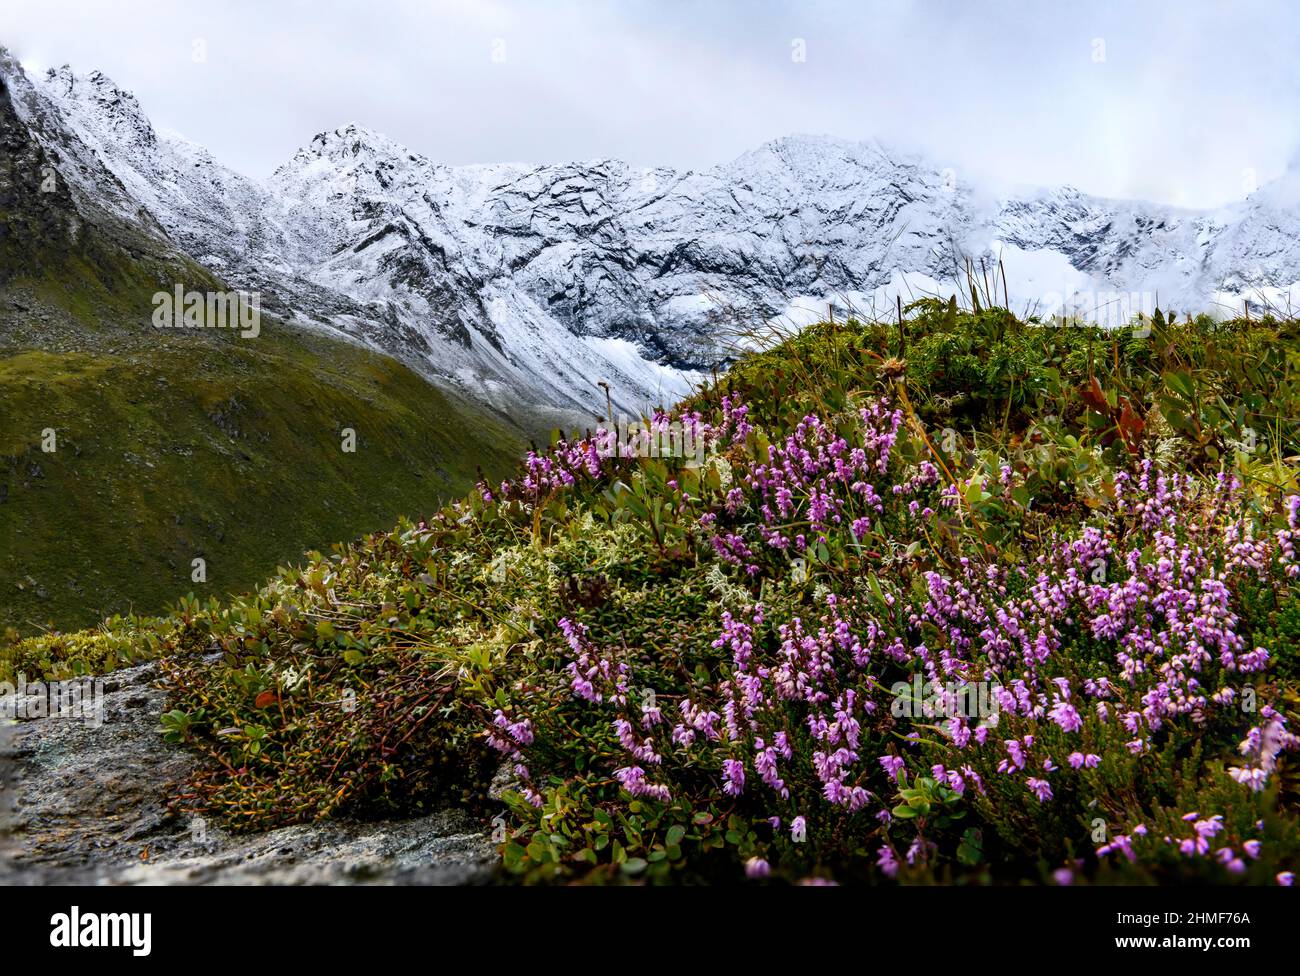 Spike heather (Erica spiculifolia), with snowy mountains in the background, Sellrain, Innsbruck, Tyrol, Austria Stock Photo